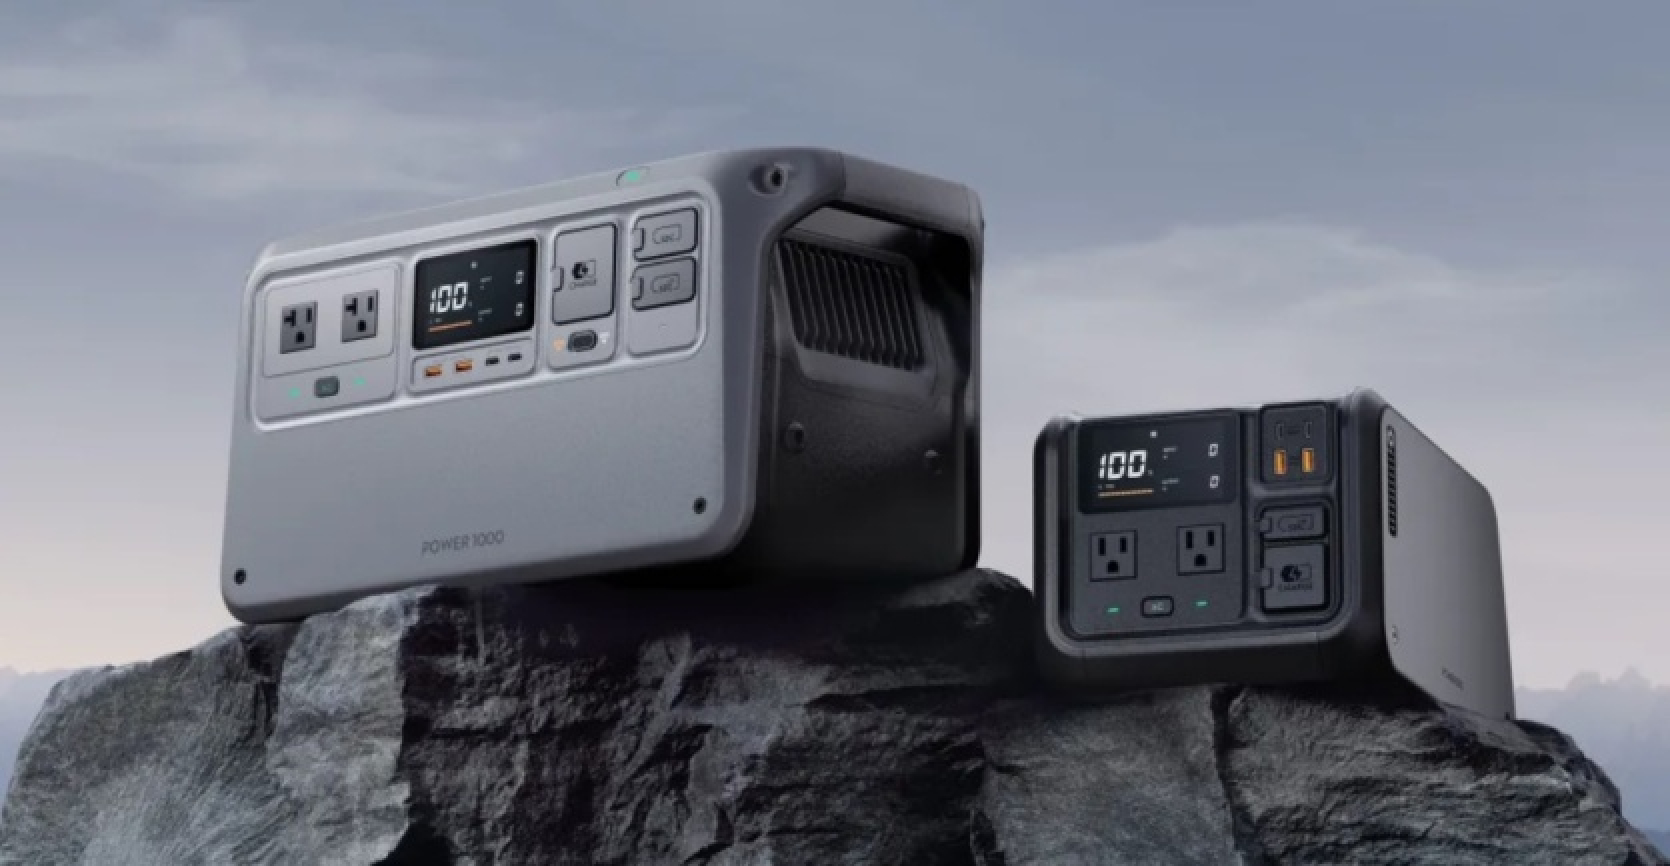 DJI's backup batteries can power household appliances and charge drones - a 1,000Wh version will cost $1,000